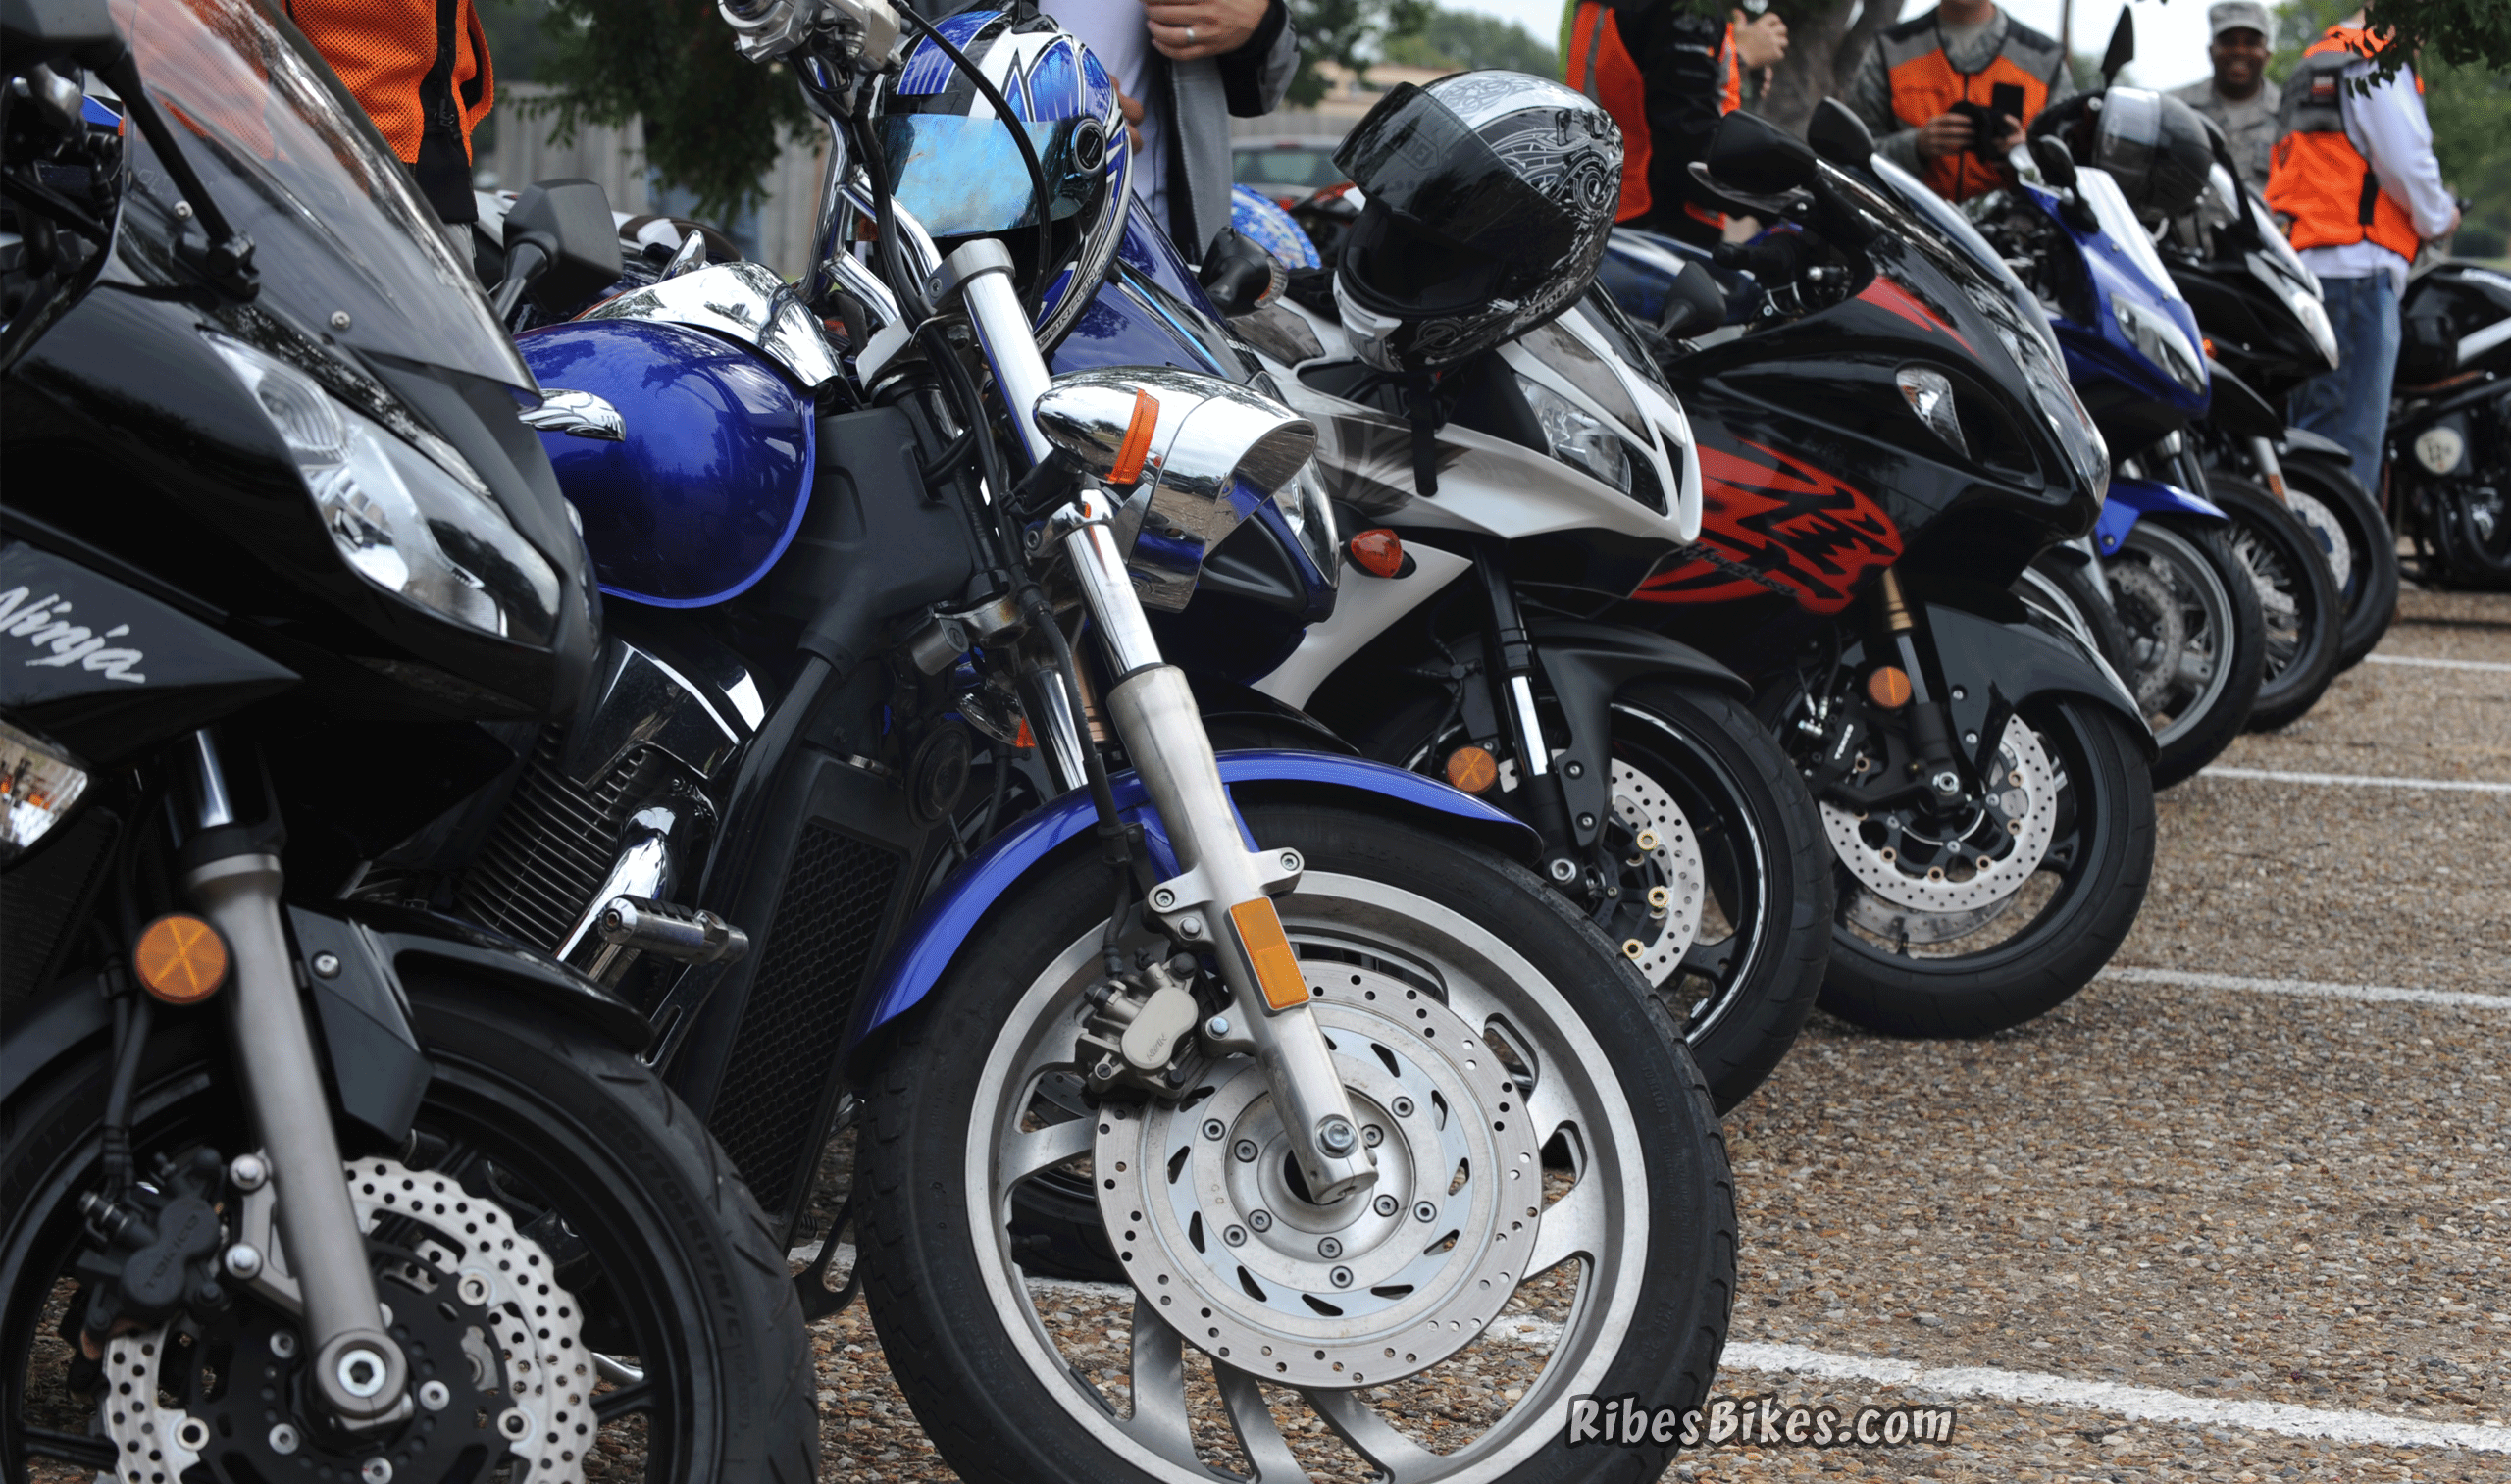 w-sitges-hire-rent-moped-moto